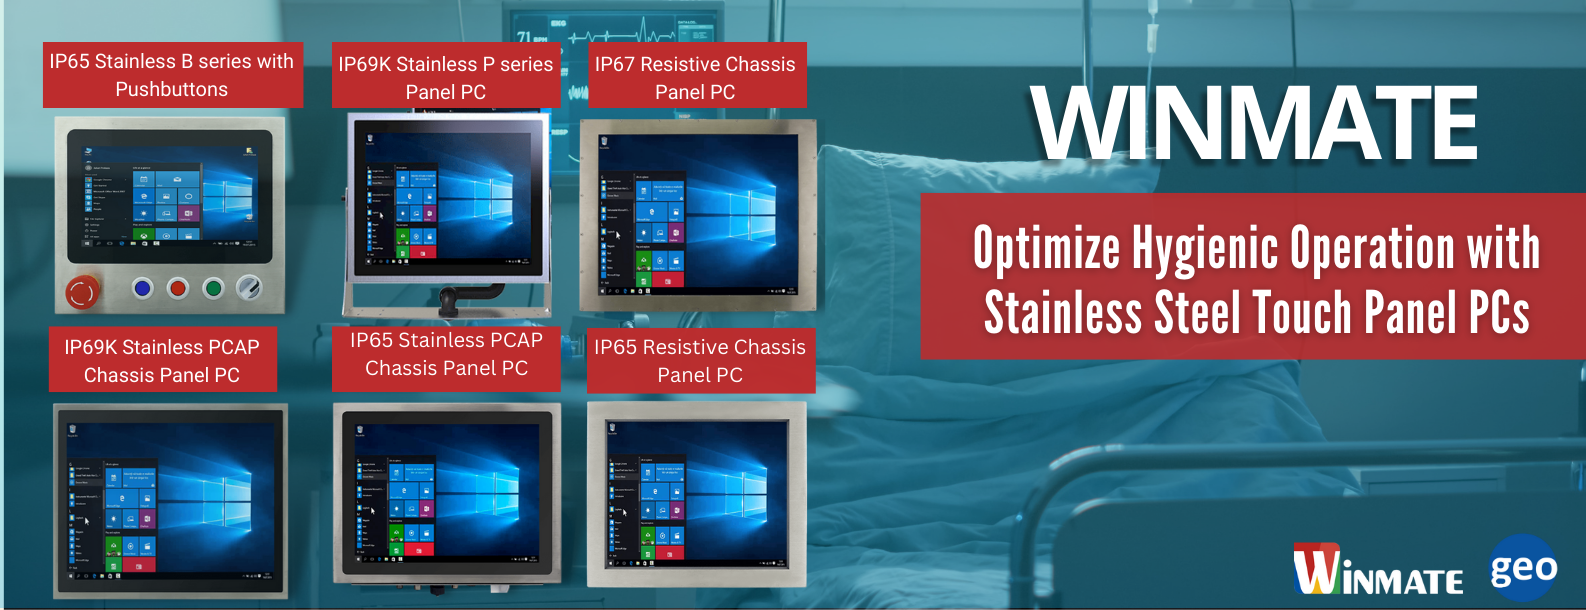 Winmate: Optimize Hygienic Operation with Stainless Steel Touch Panel PCs